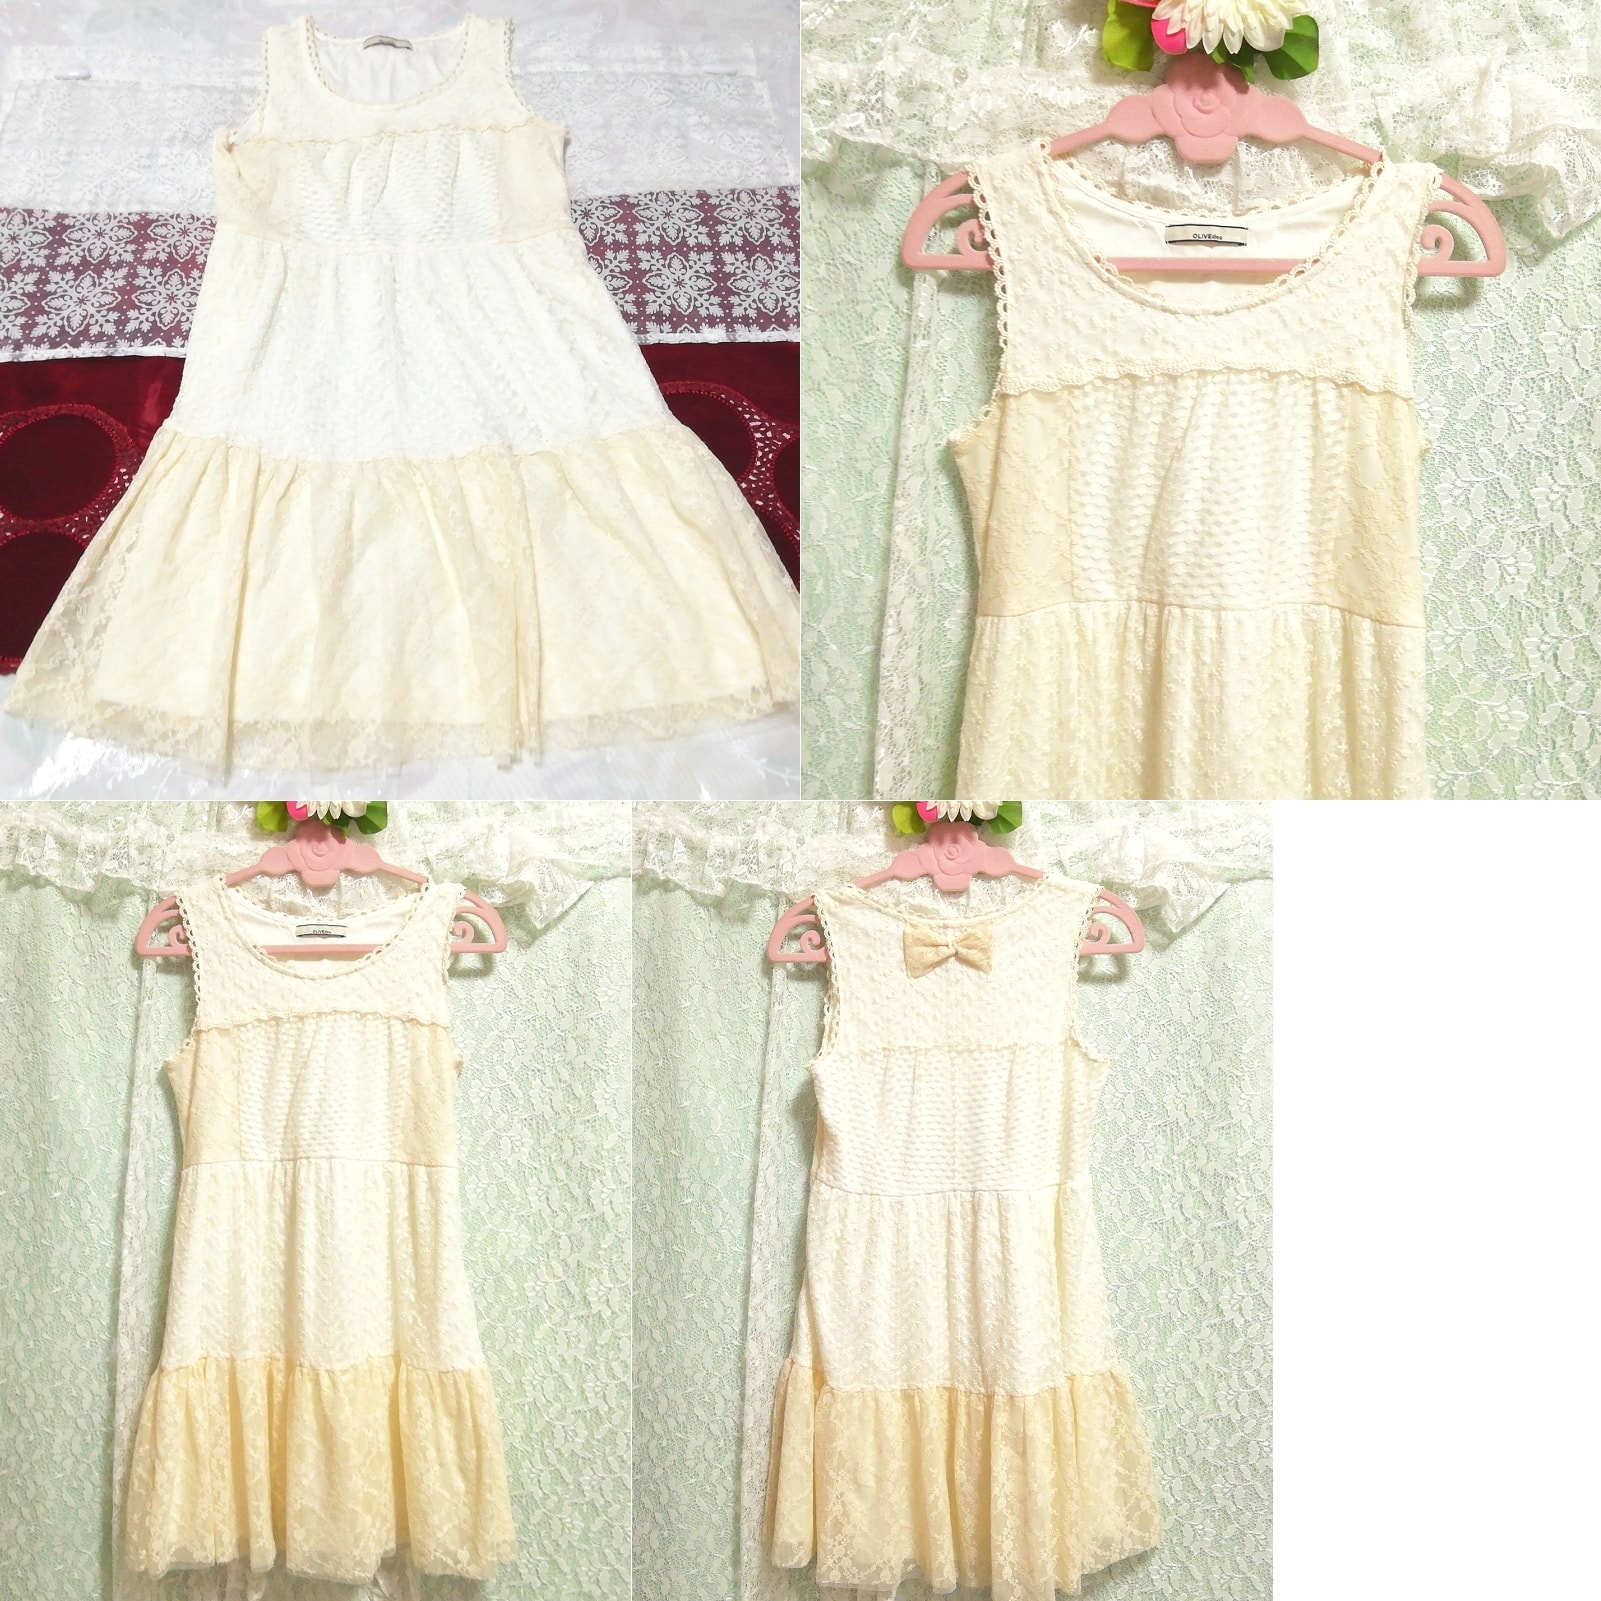 Floral white flaxen lace ribbon sleeveless negligee nightgown dress, knee length skirt, m size